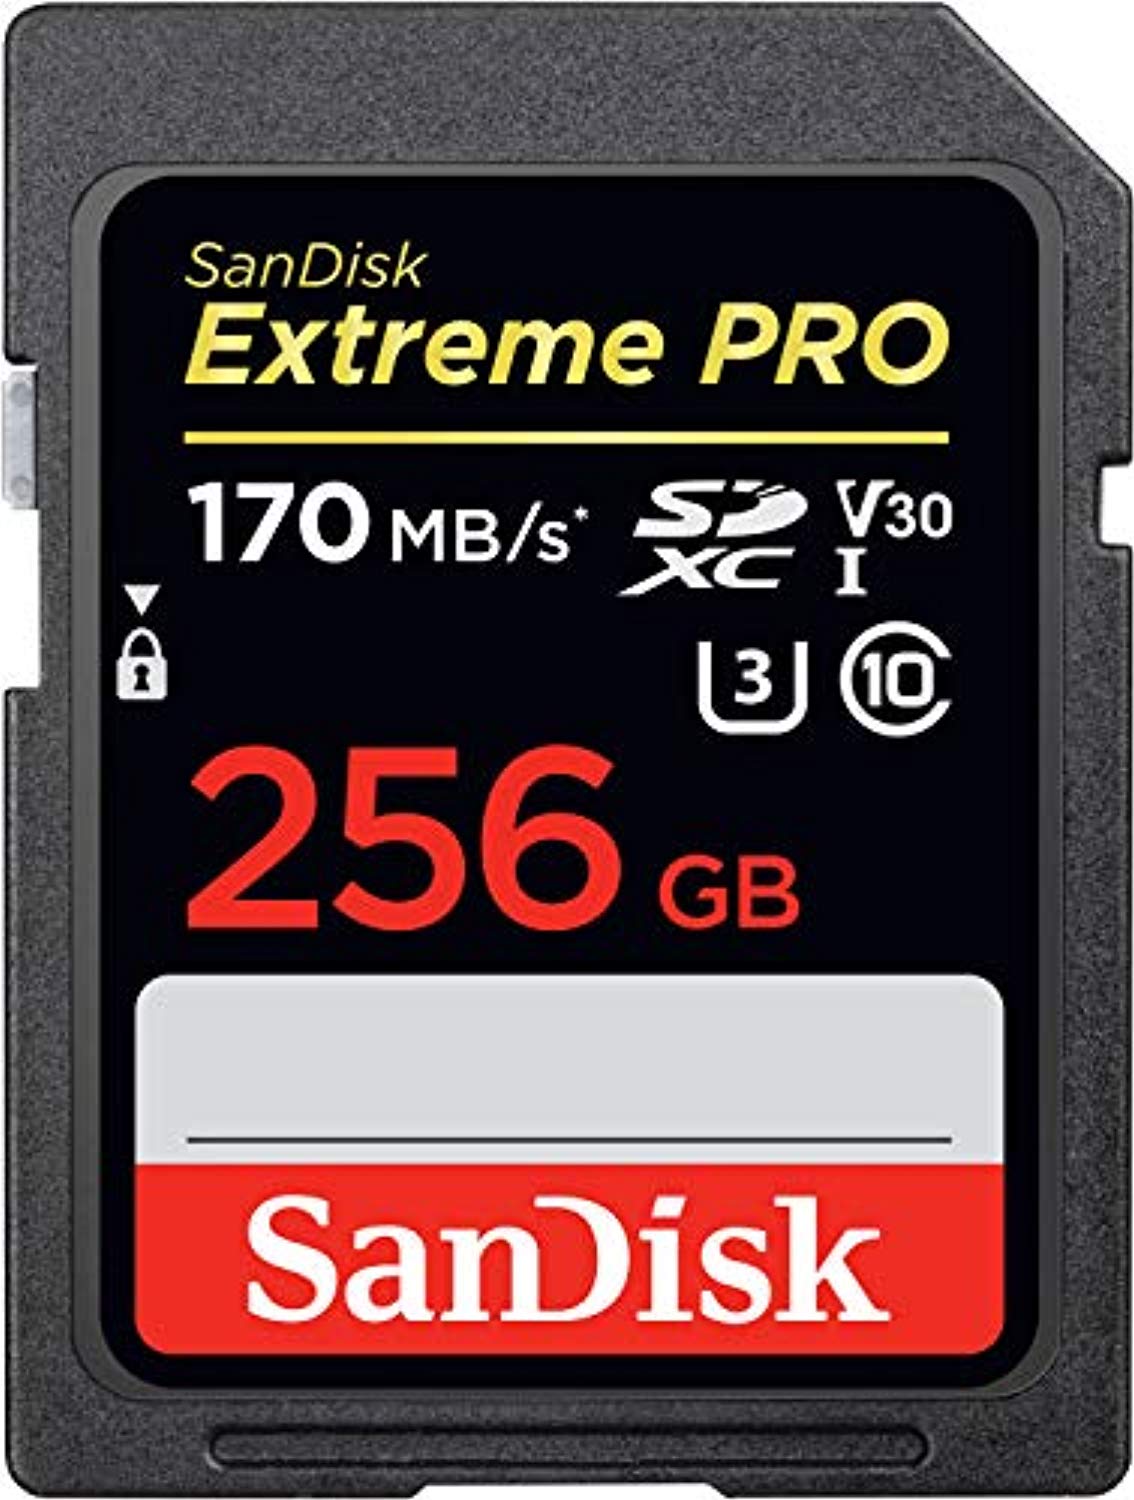 SanDisk Extreme PRO 256 GB SDXC Memory Card - Offer Games